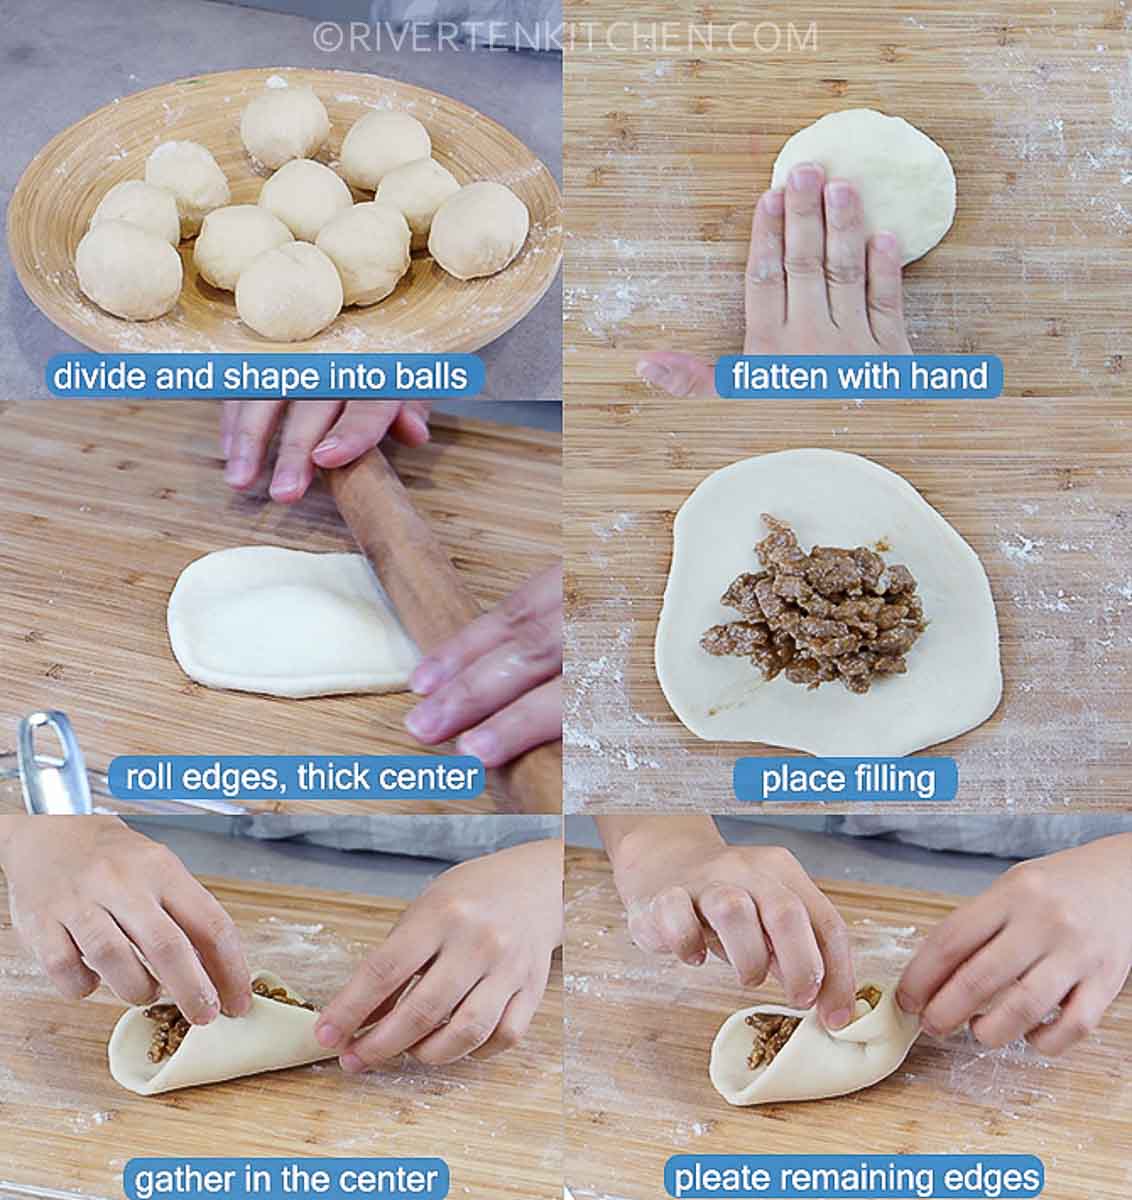 step by step photos of shaping char siu bao or steamed buns